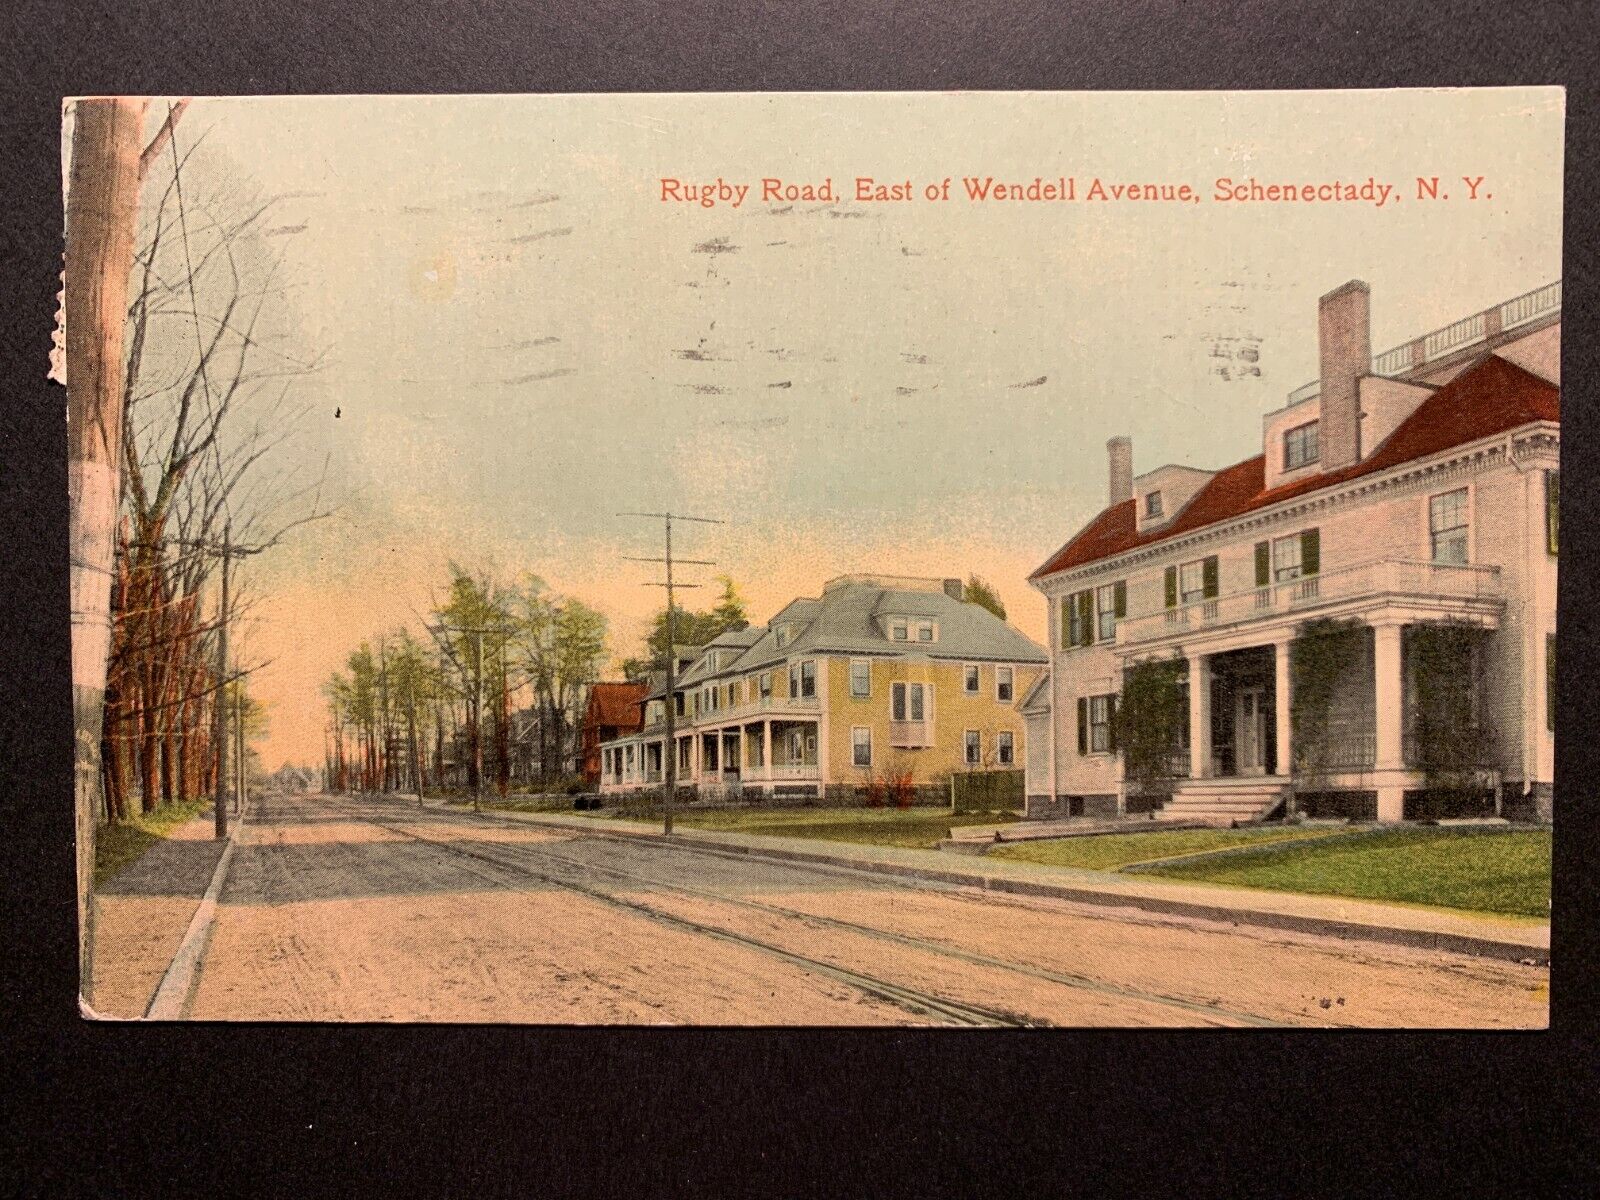 Postcard Schenectady NY - c1920s Houses Along Rugby Road East of Wendell Avenue